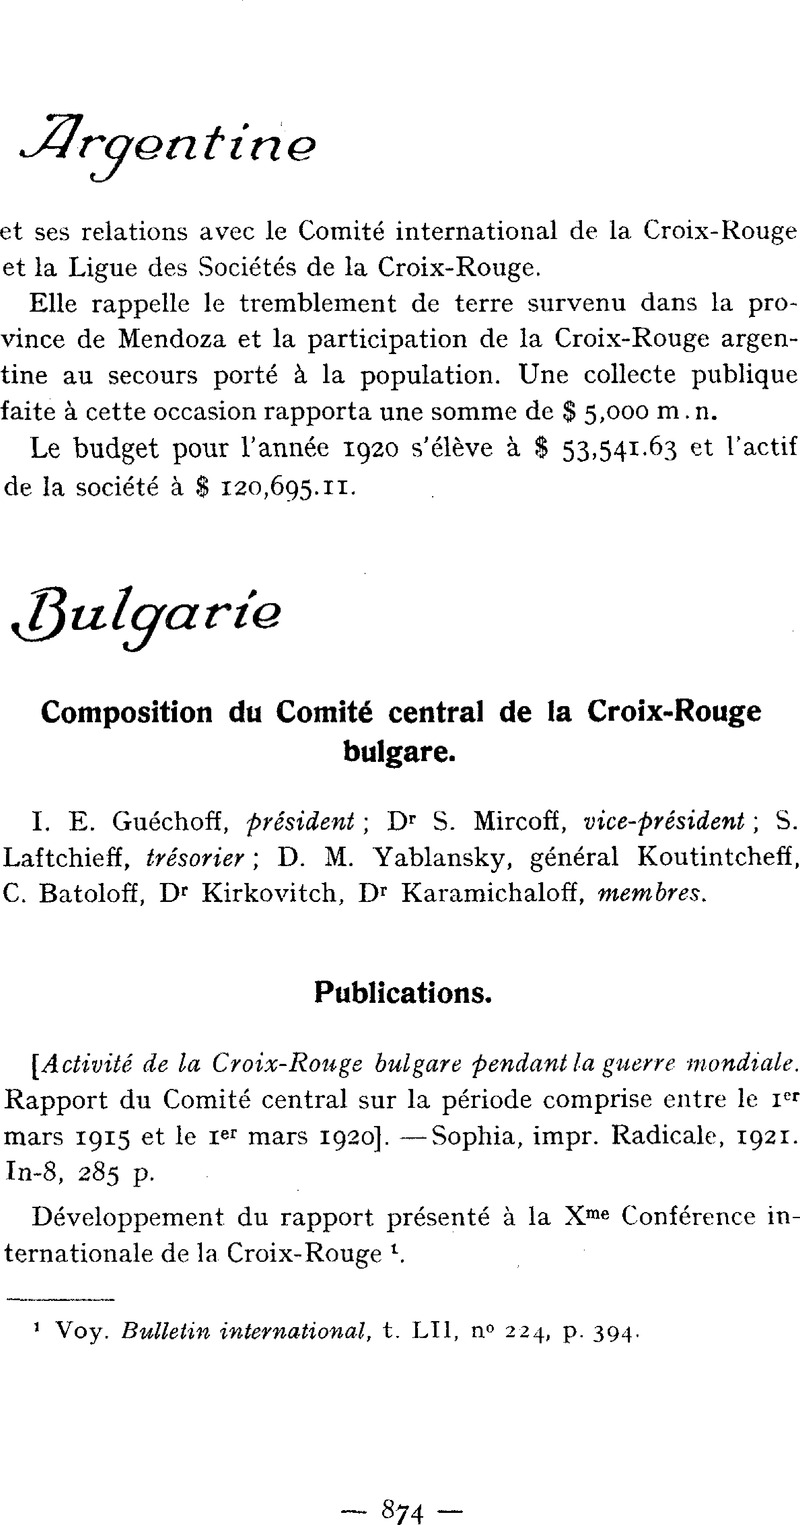 Bulgarie International Review Of The Red Cross Cambridge Core